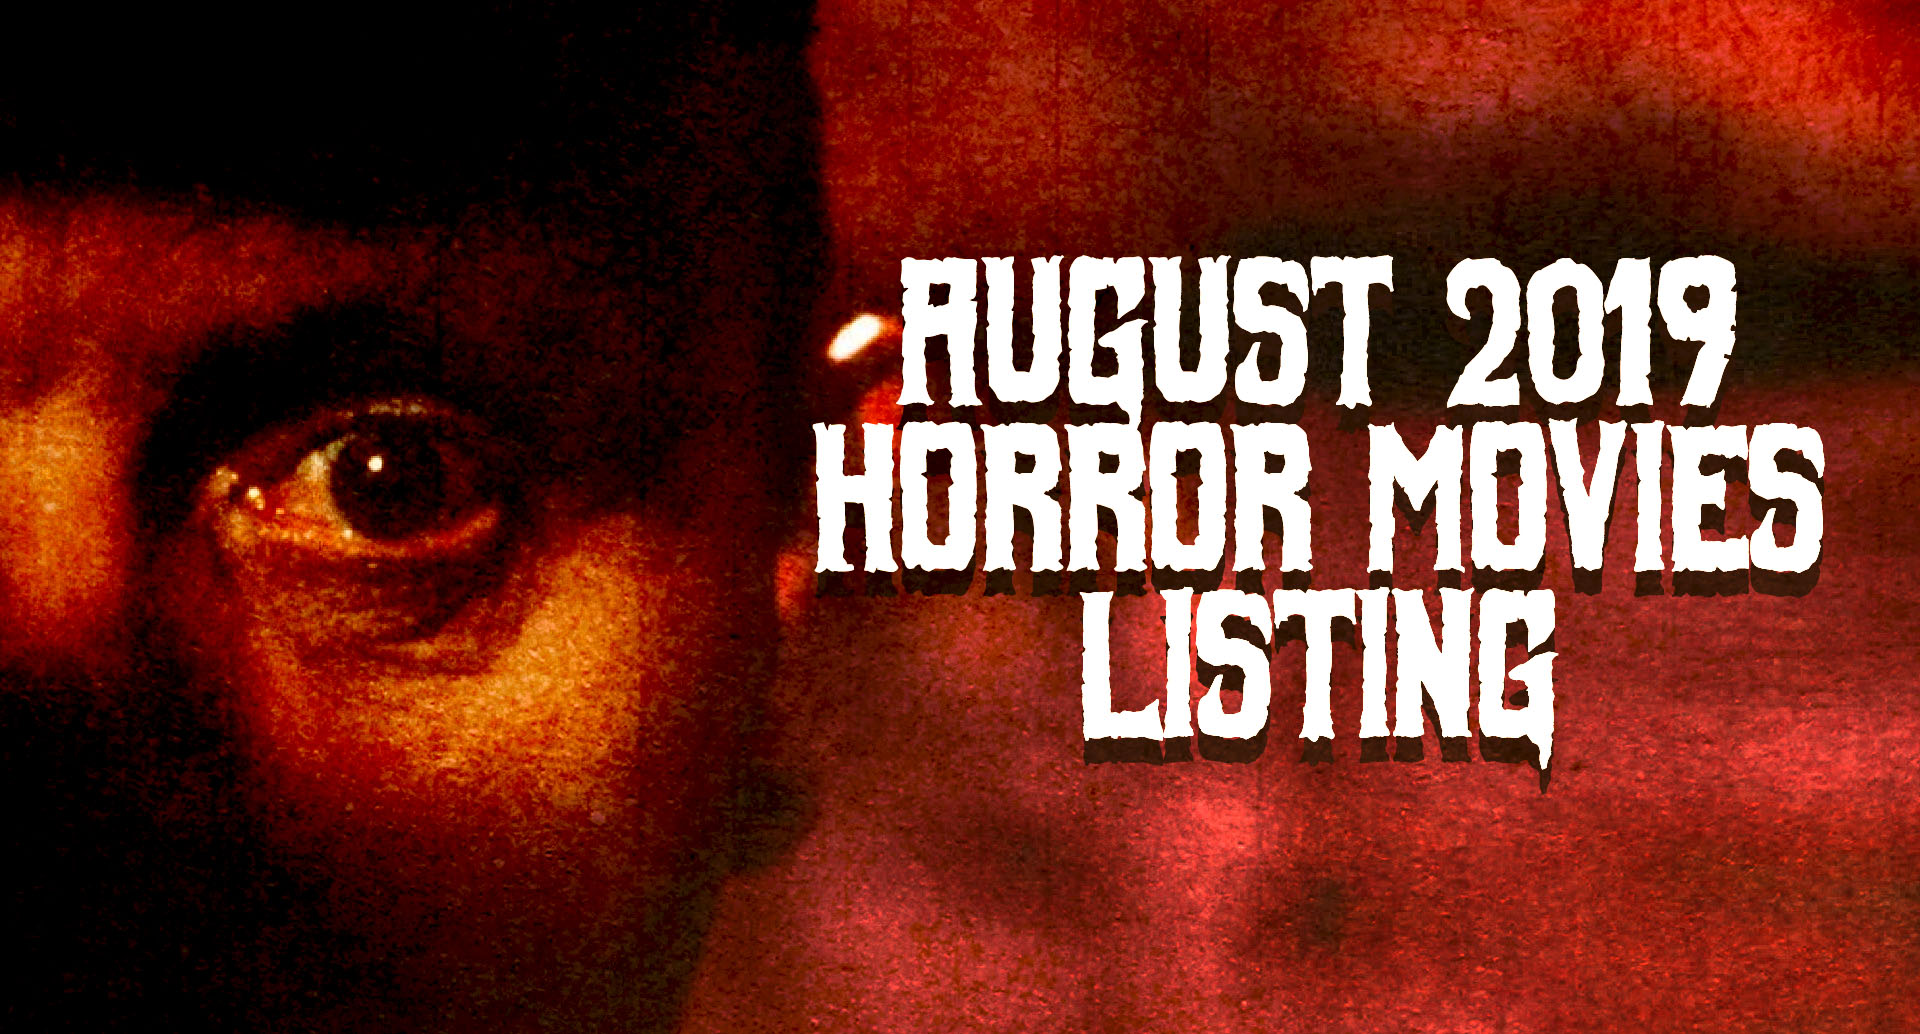  Horror Movies Showing in August 2019